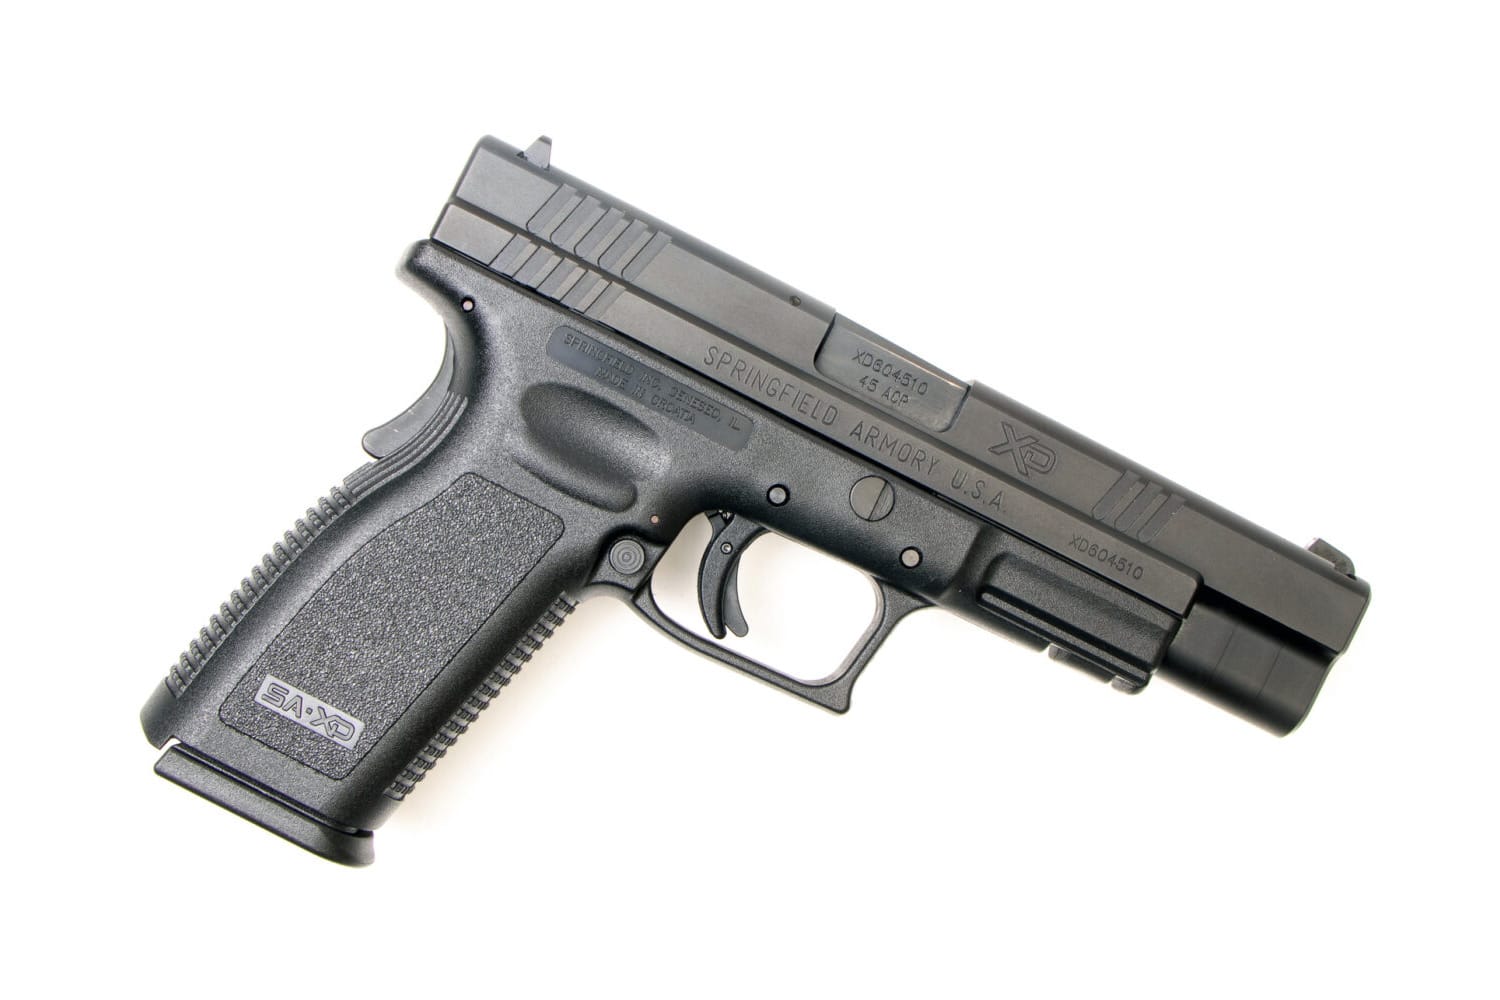 Side view of the Springfield XD Tactical .45 ACP pistol